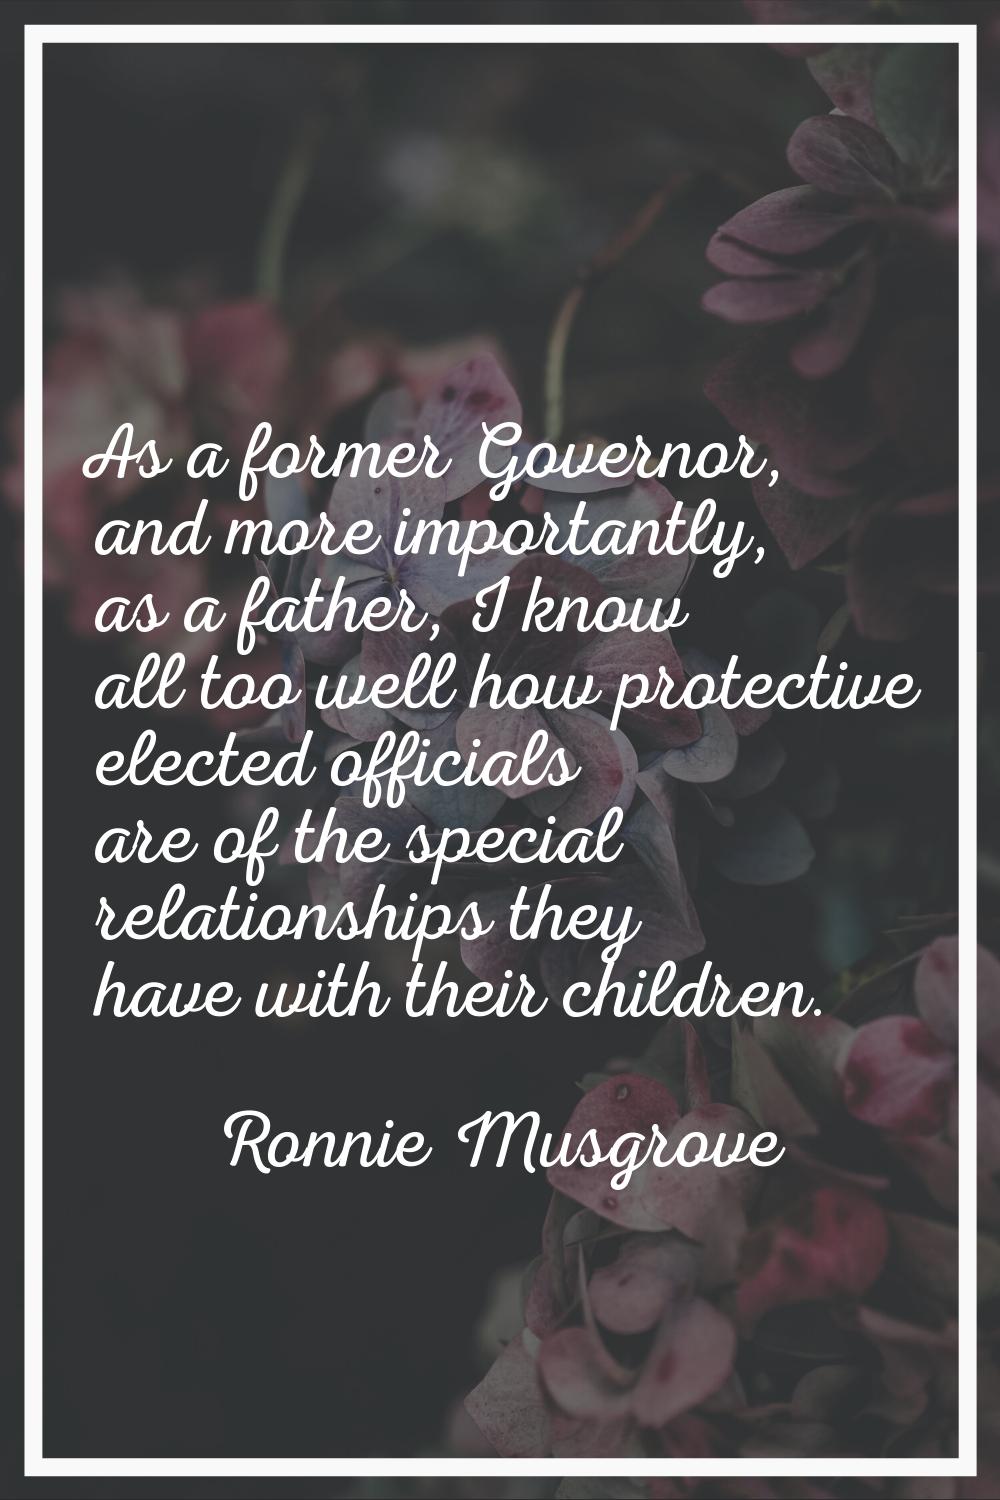 As a former Governor, and more importantly, as a father, I know all too well how protective elected